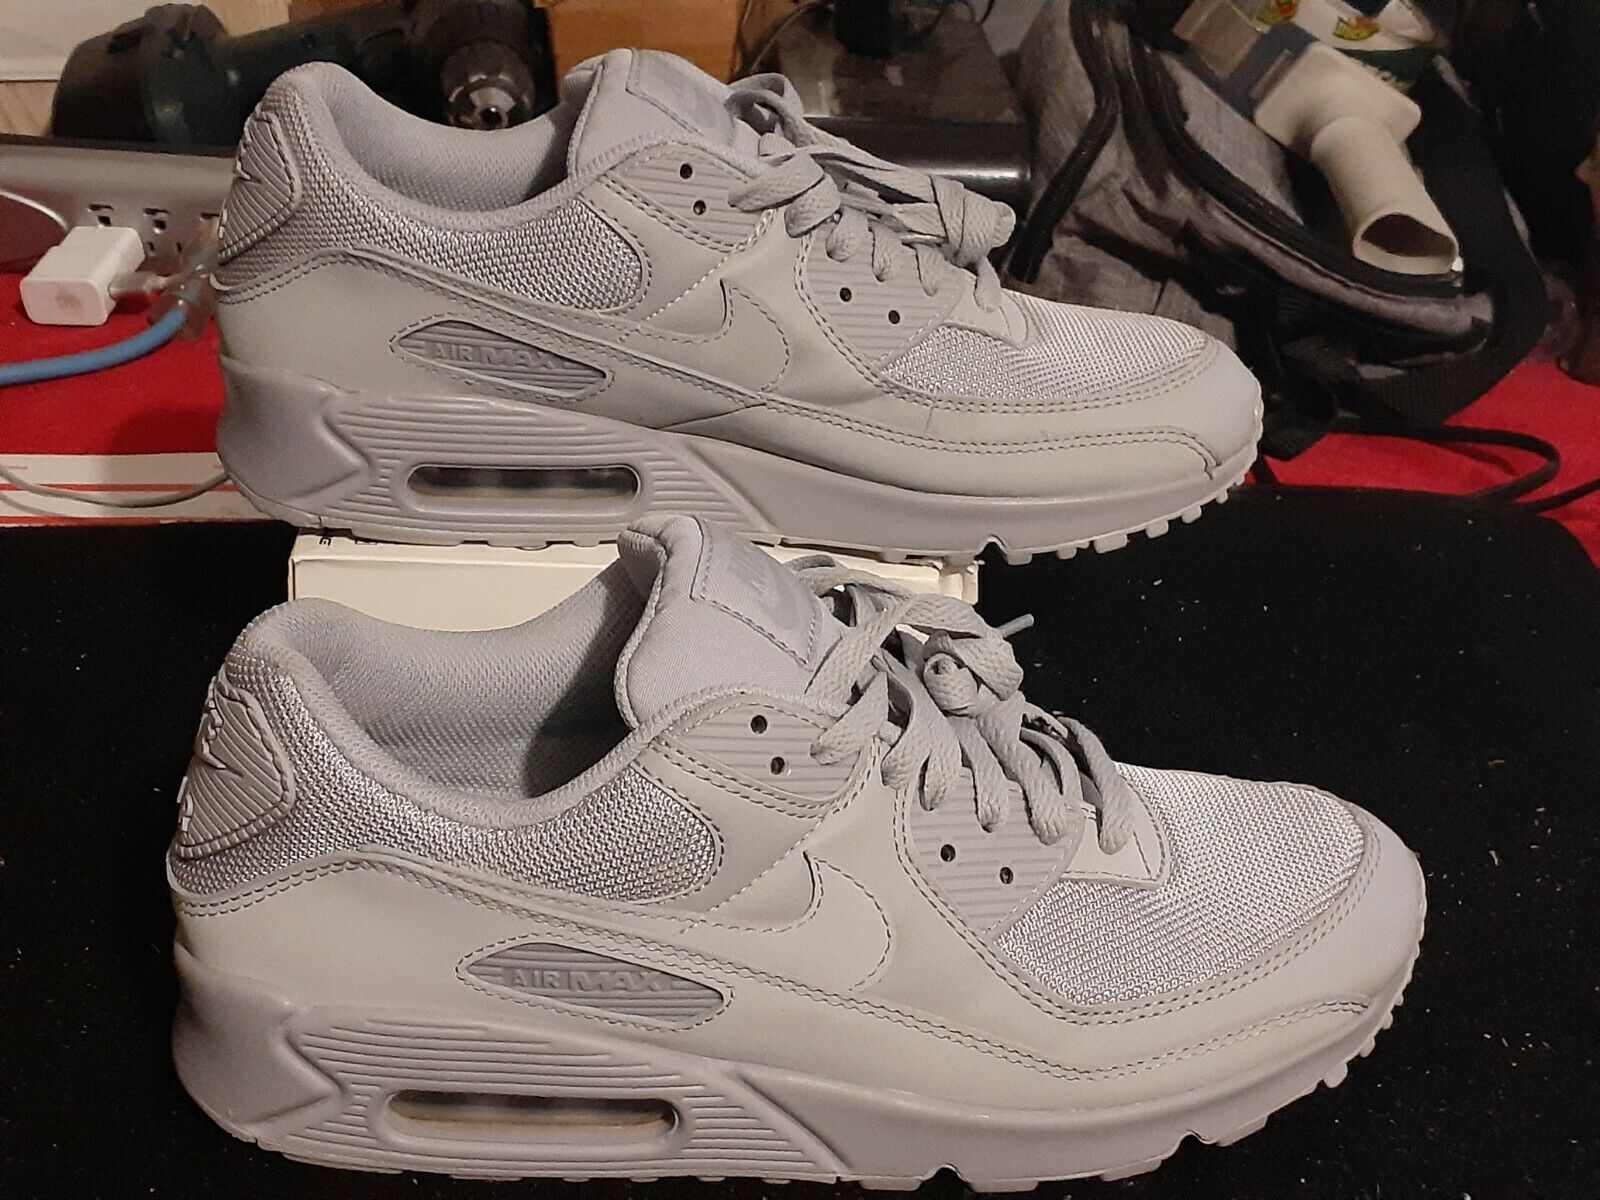 Nike Air Max 90 Triple Wolf Grey Mens running shoes size 9.5 Excellent condition